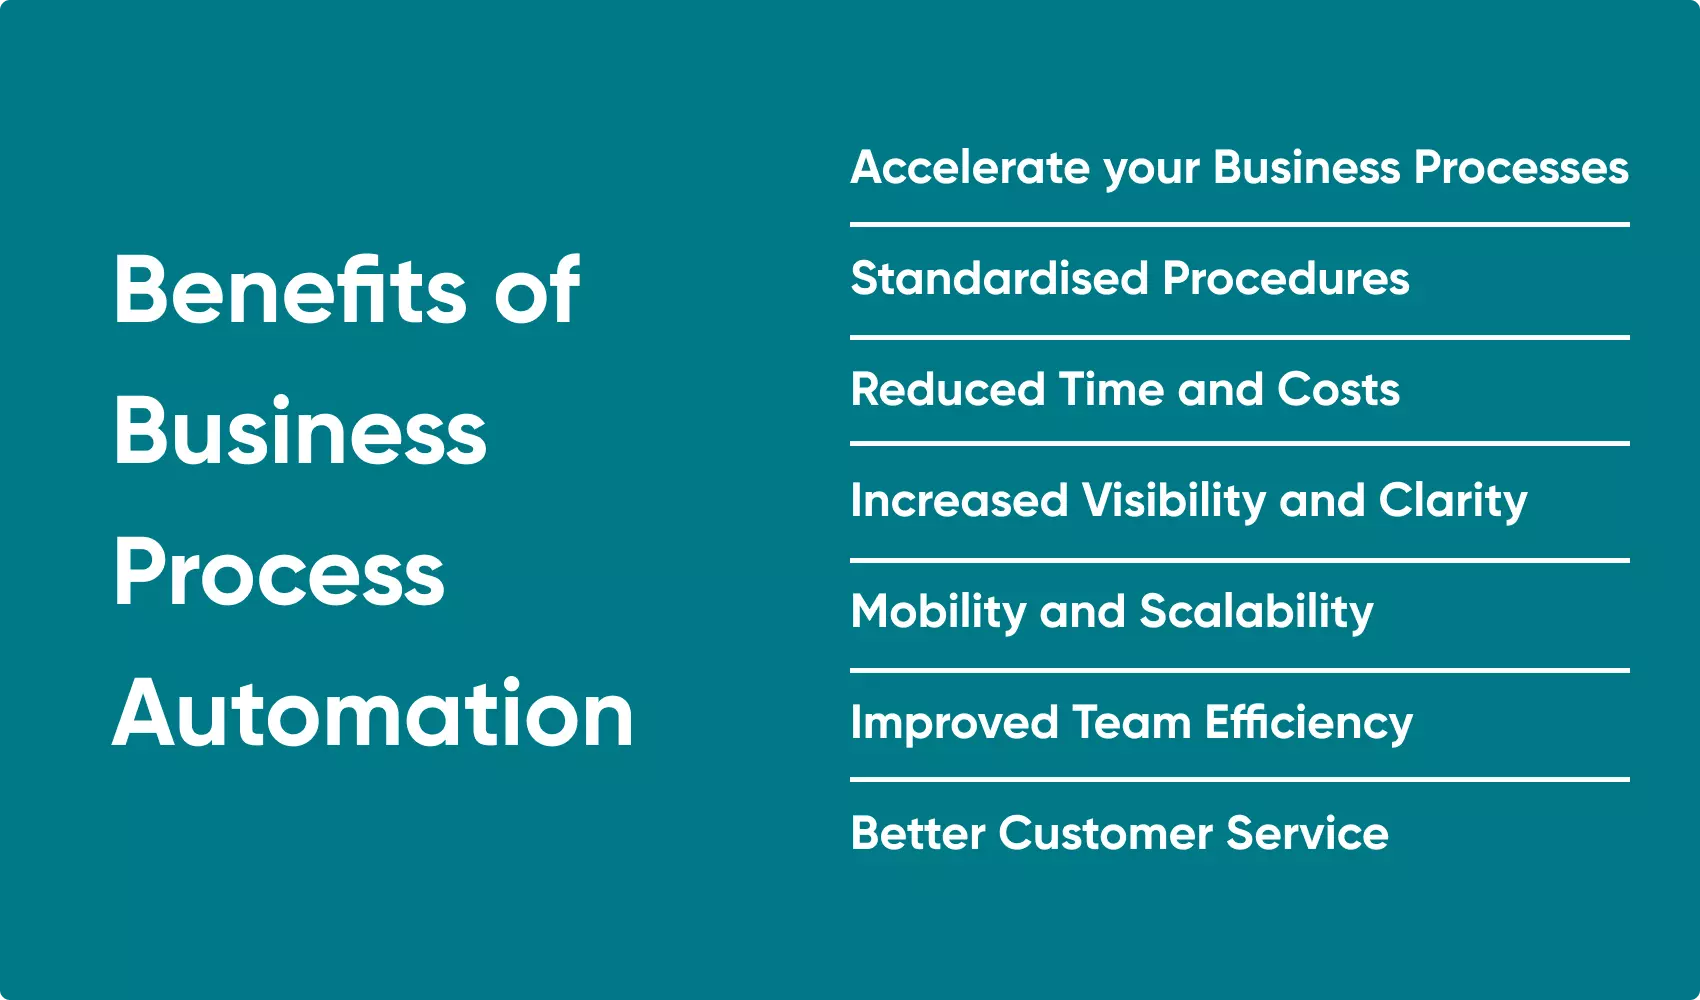 A look at the possible Benefits of Business Process Automation.